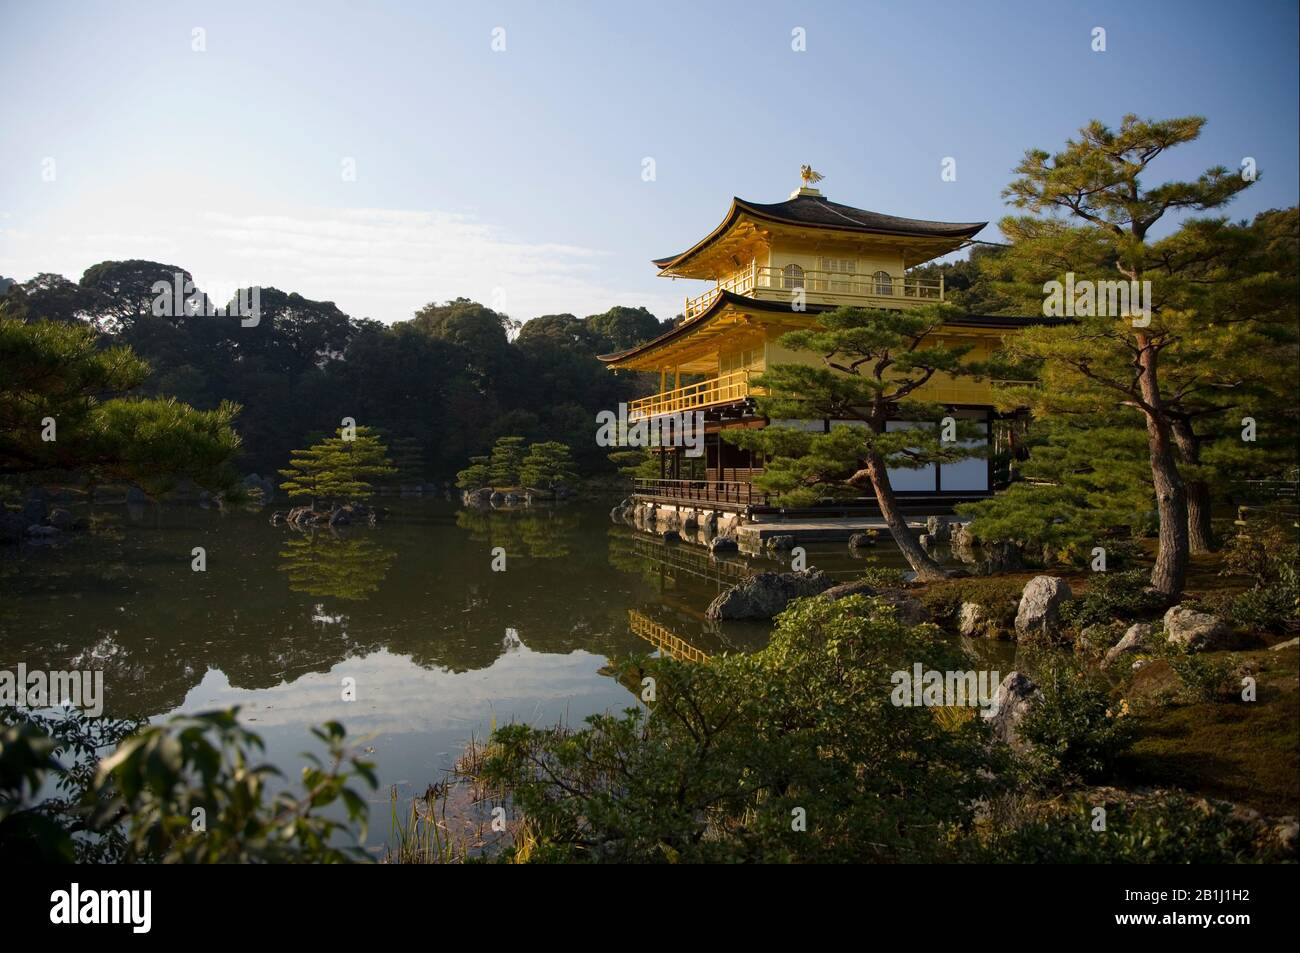 Temple of the Golden Pavilion in Japan Stock Photo